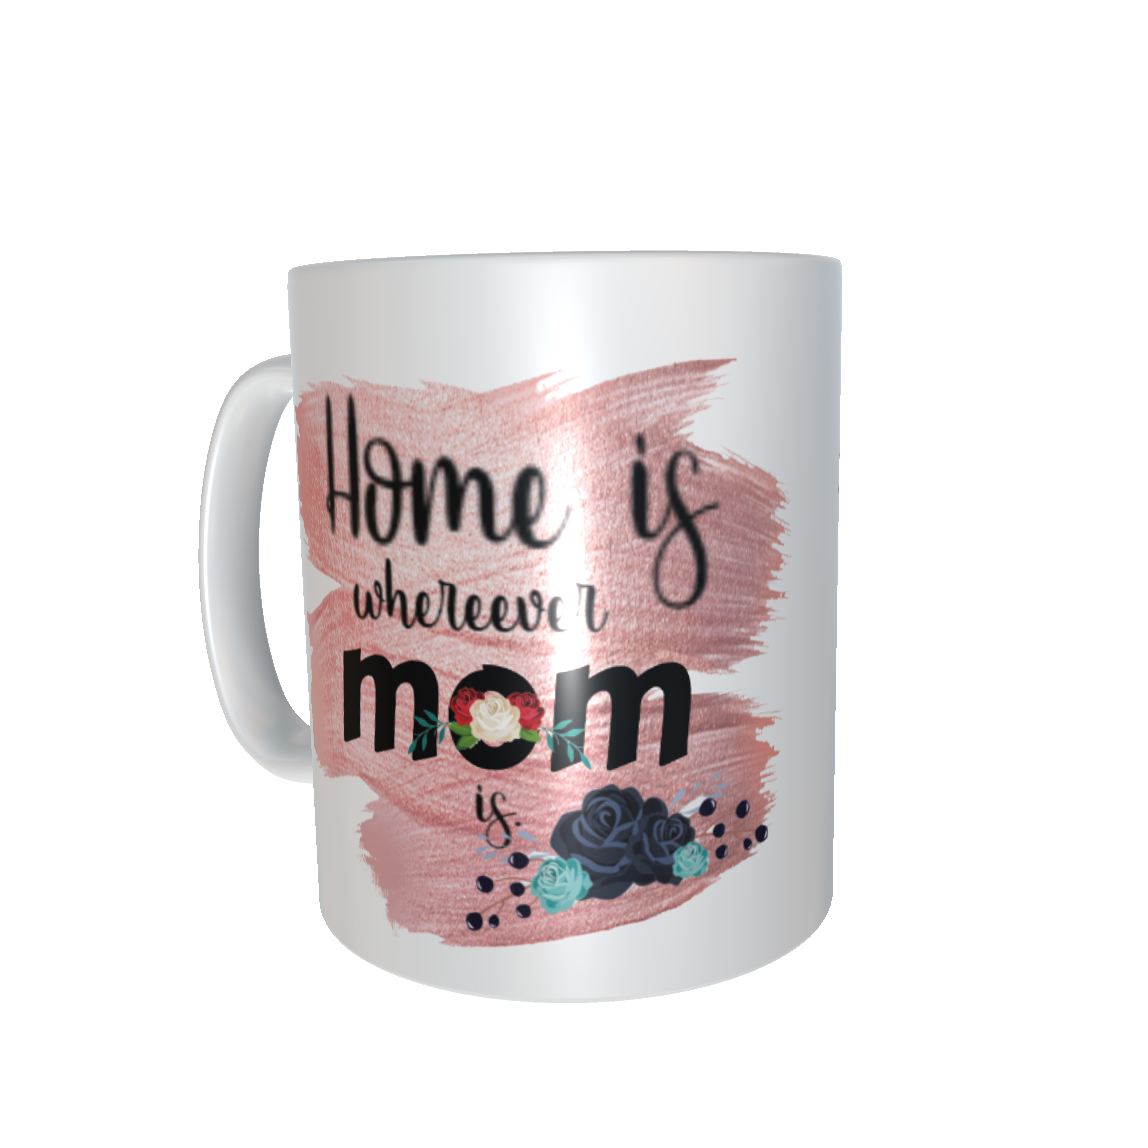 Mother Day cups | Sandrepersonalization.